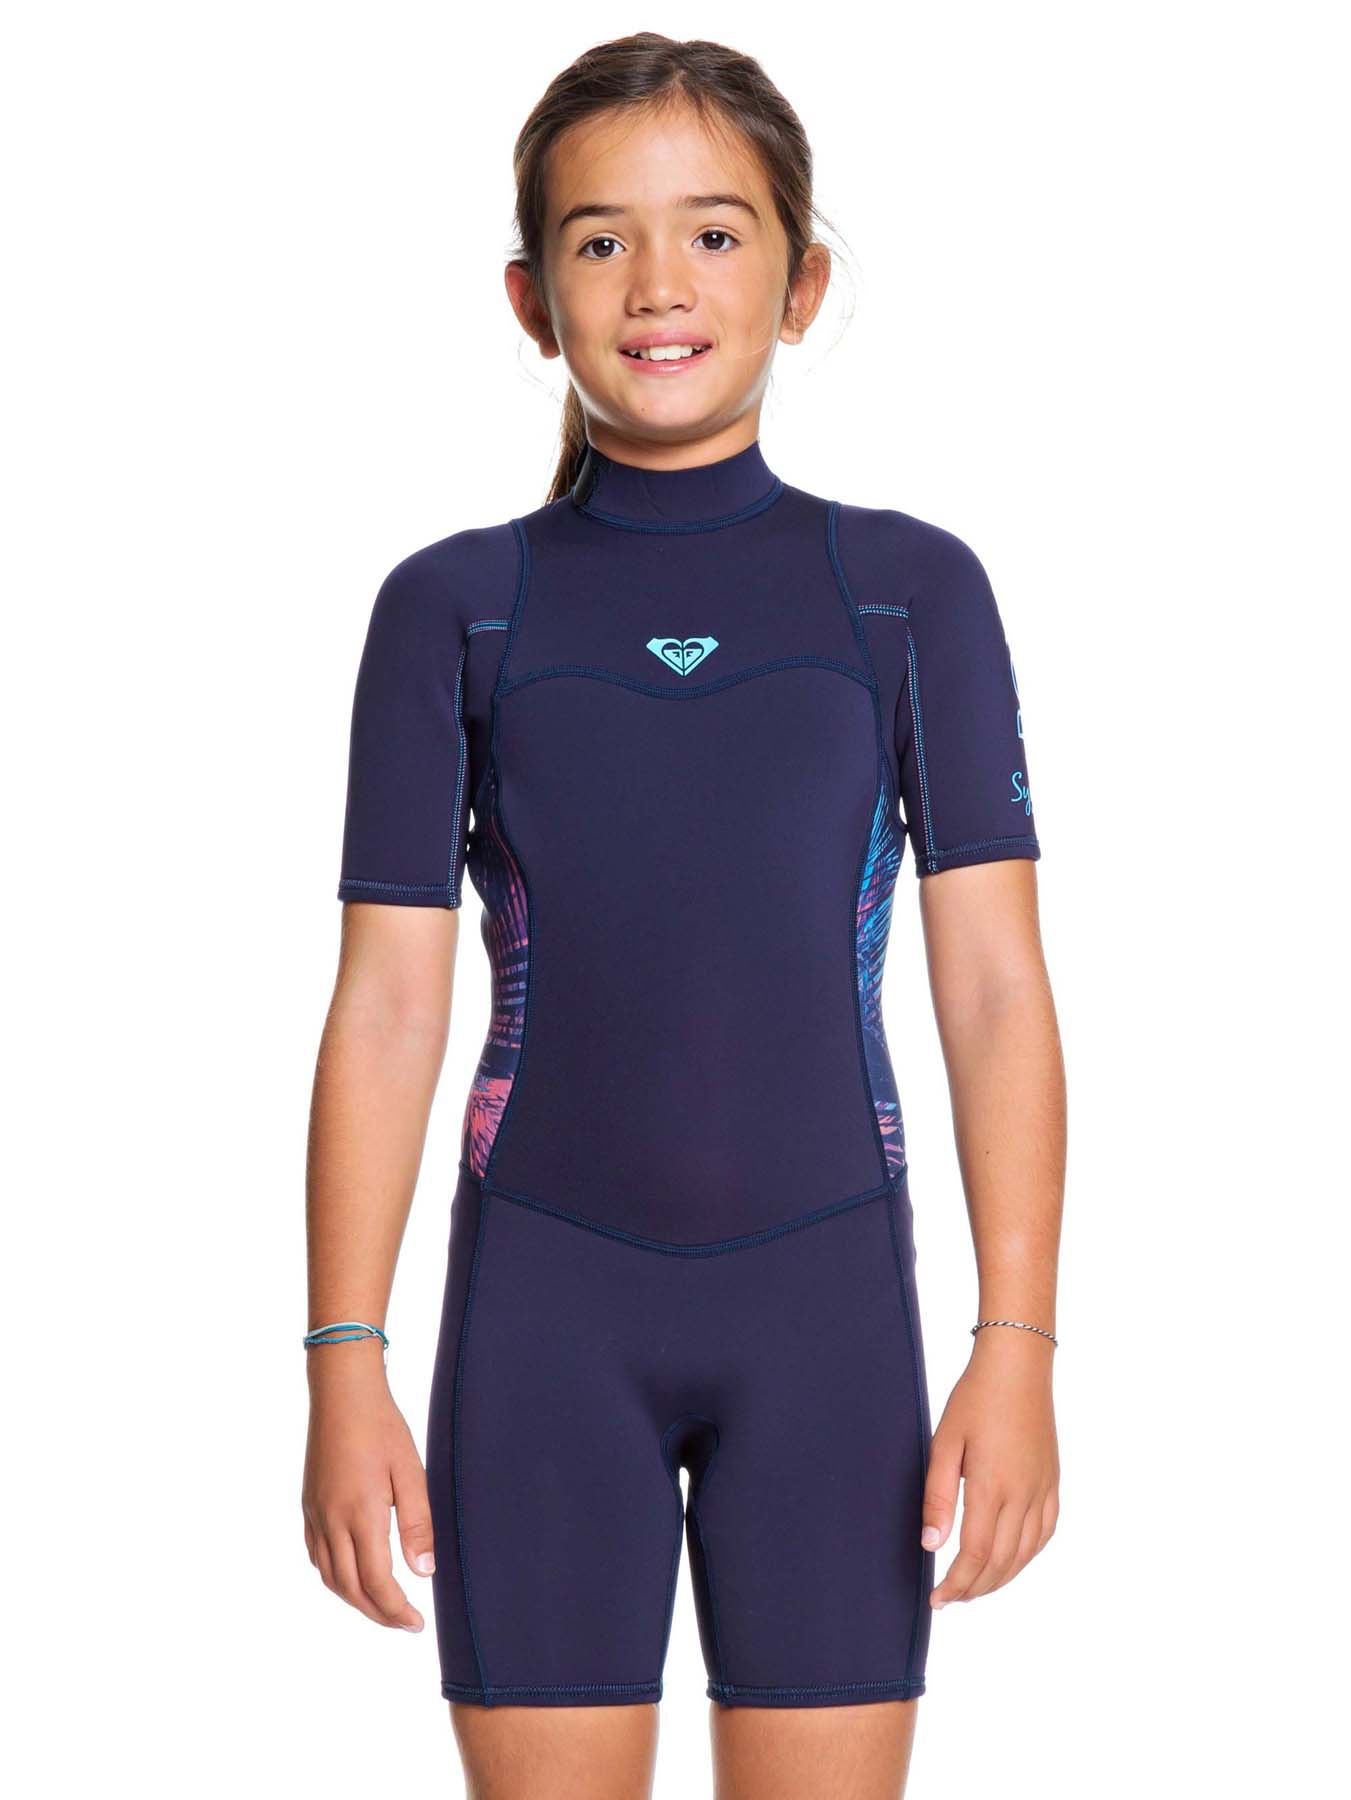 Roxy Girls 8 14 Syncro 22mm Ss Back Zip Flt Springsuit Wetsuit Blue Ribboncoral Surfstitch